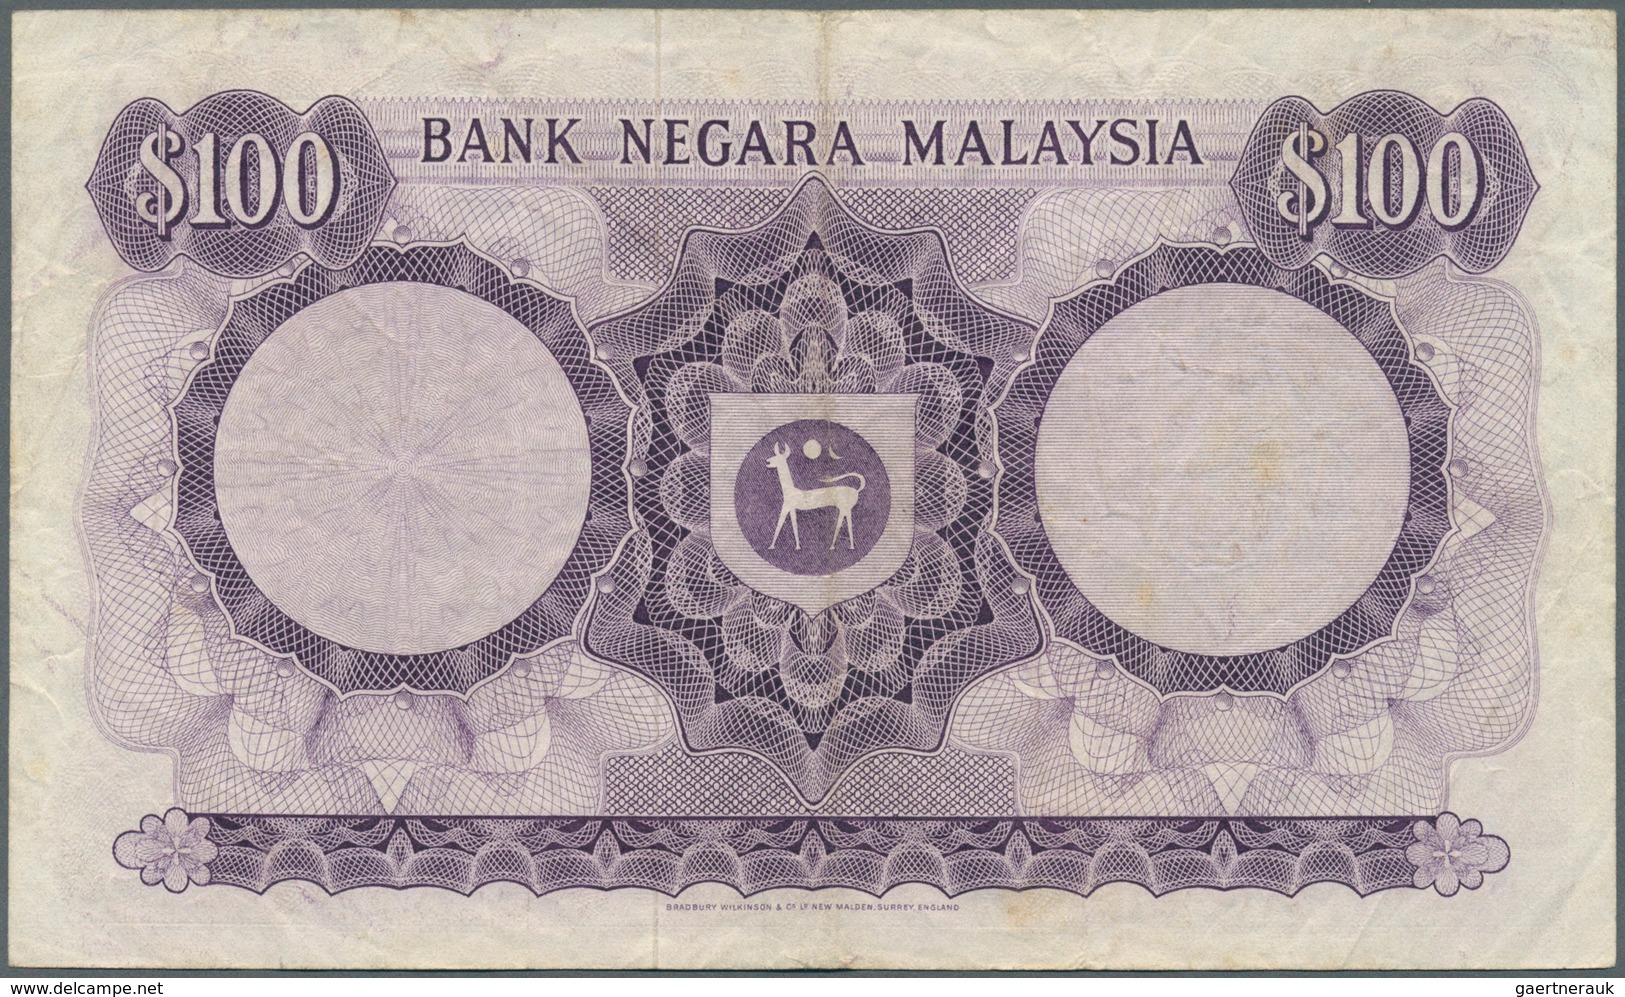 01991 Malaysia: Bank Negara Malaysia 100 Ringgit ND(1976-81), P.17, Still Nice And Attractive Note With A - Maleisië